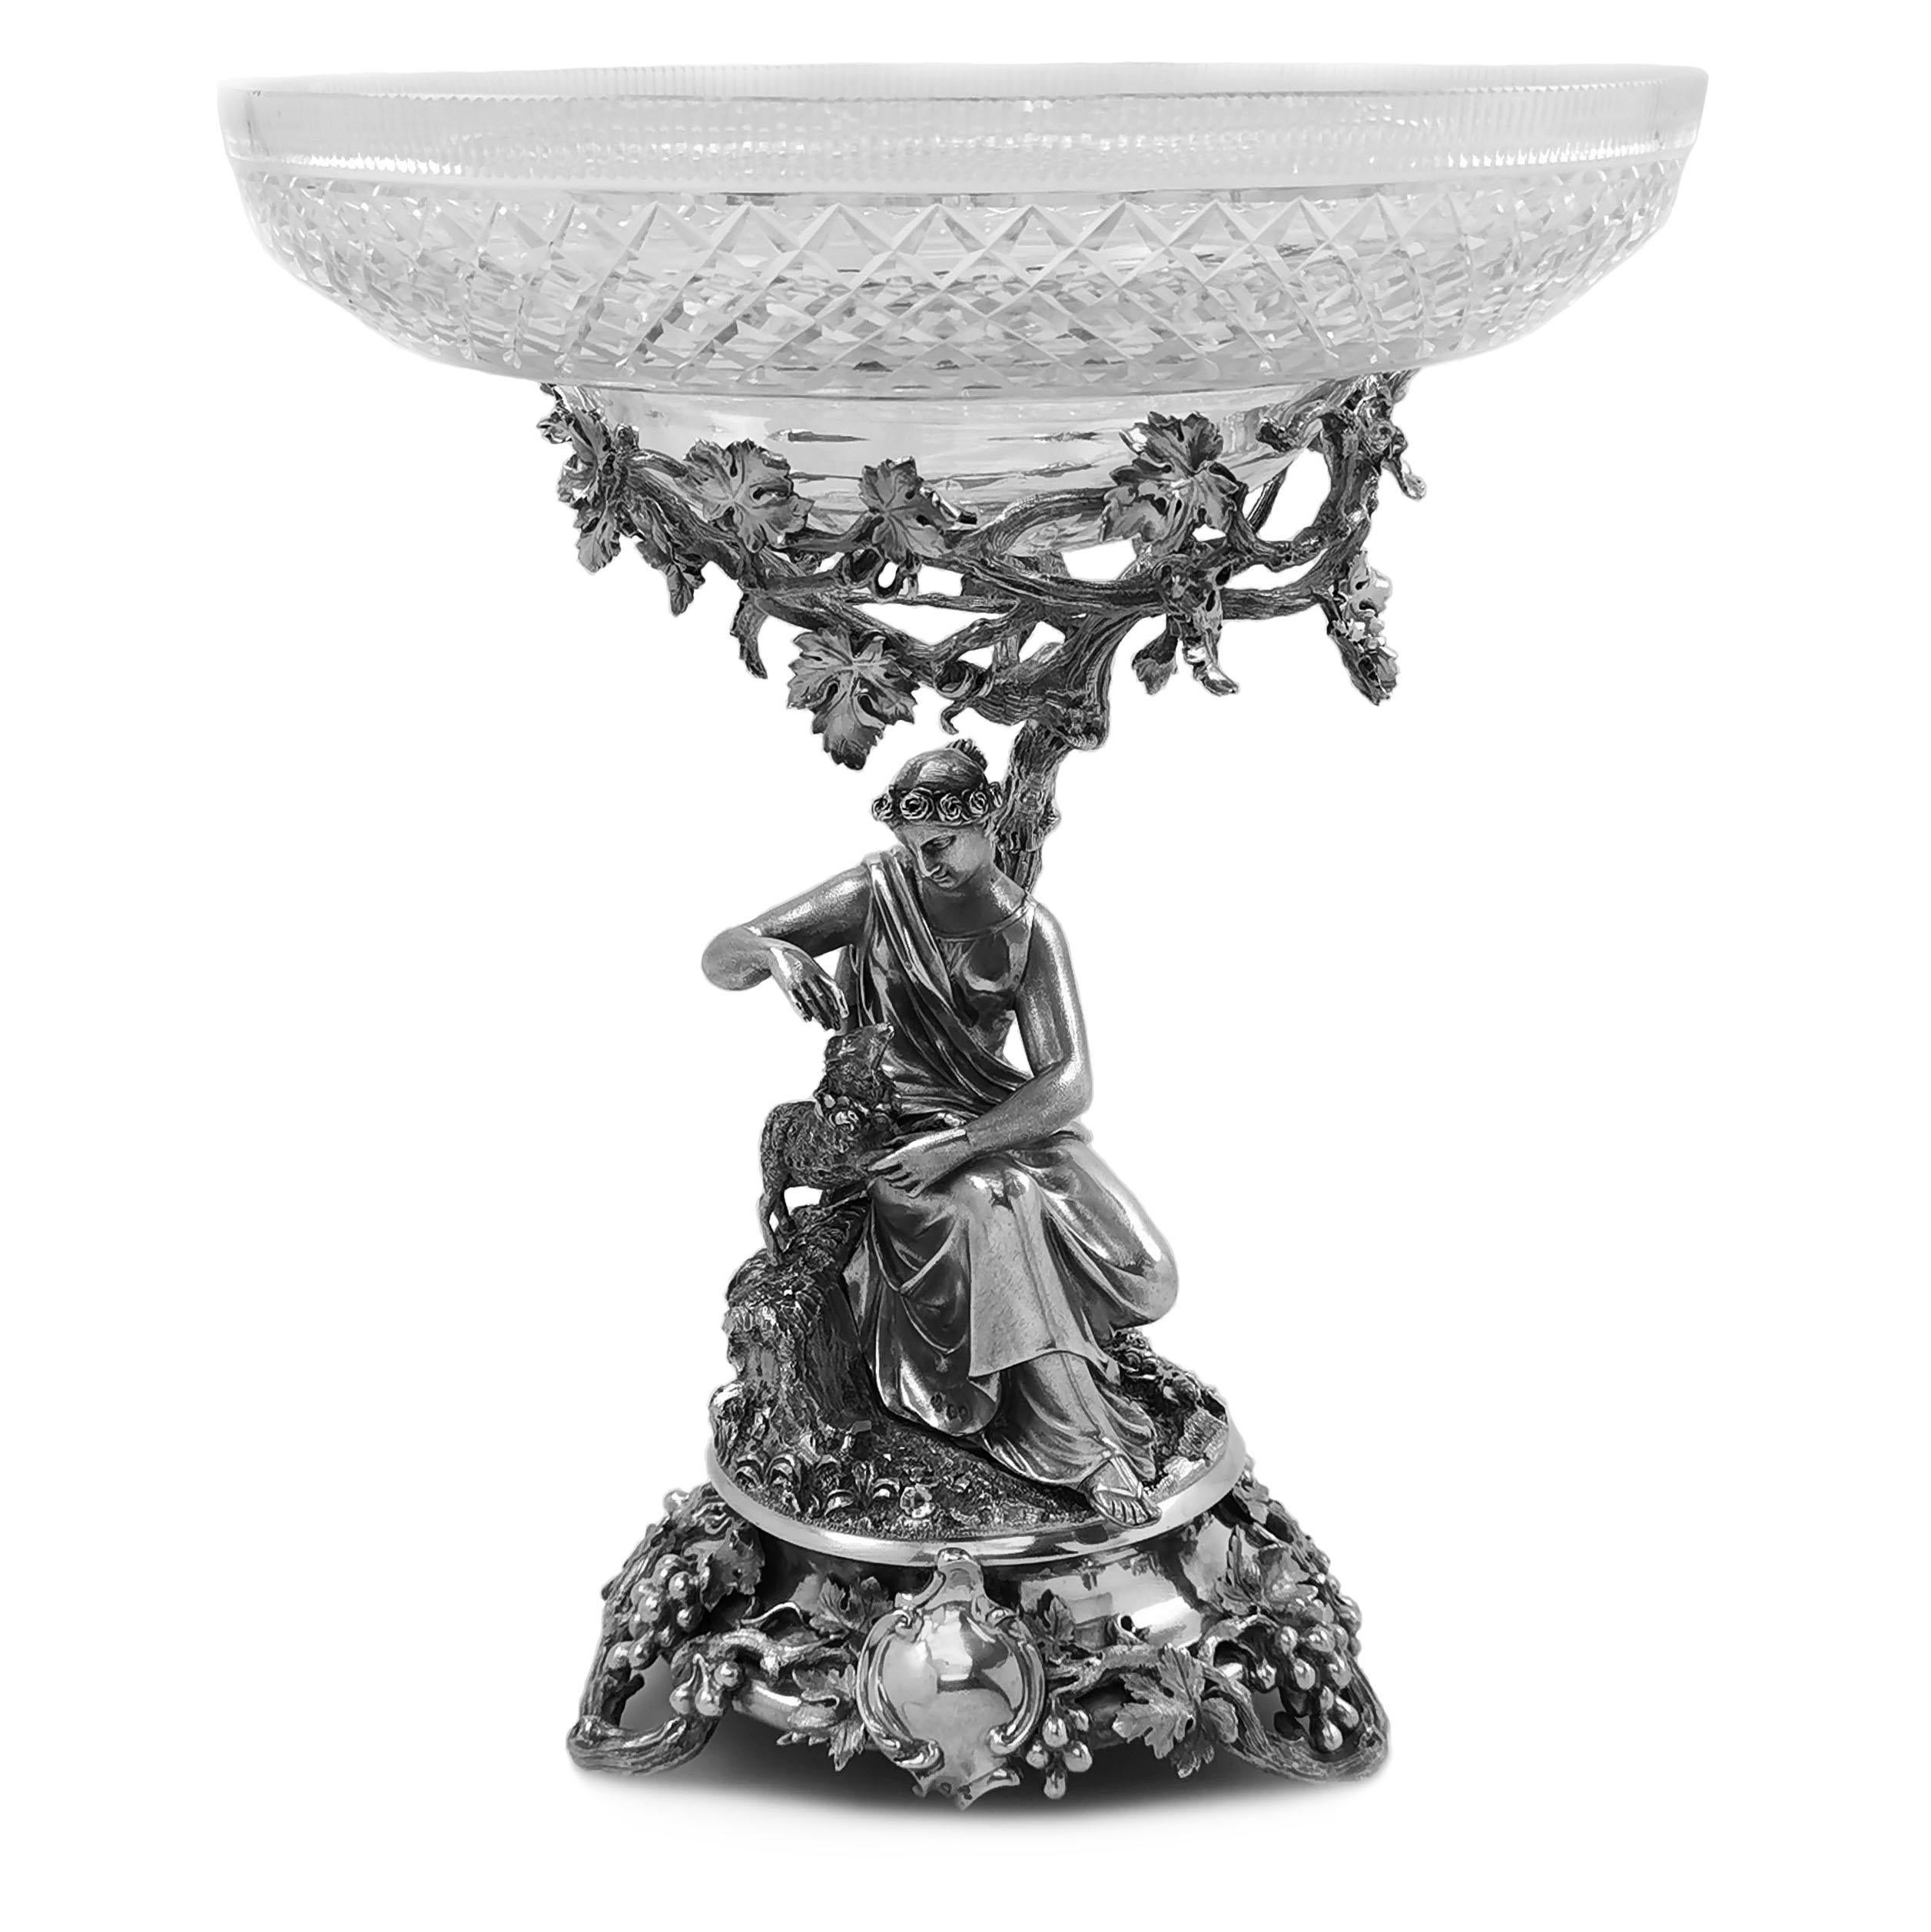 A pair of impressive antique Victorian silver comports with magnificent silver bases supporting elegant cut glass dishes. The silver bases each show a classical mythological style figure, one of a woman with a lamb beside her and the other showing a